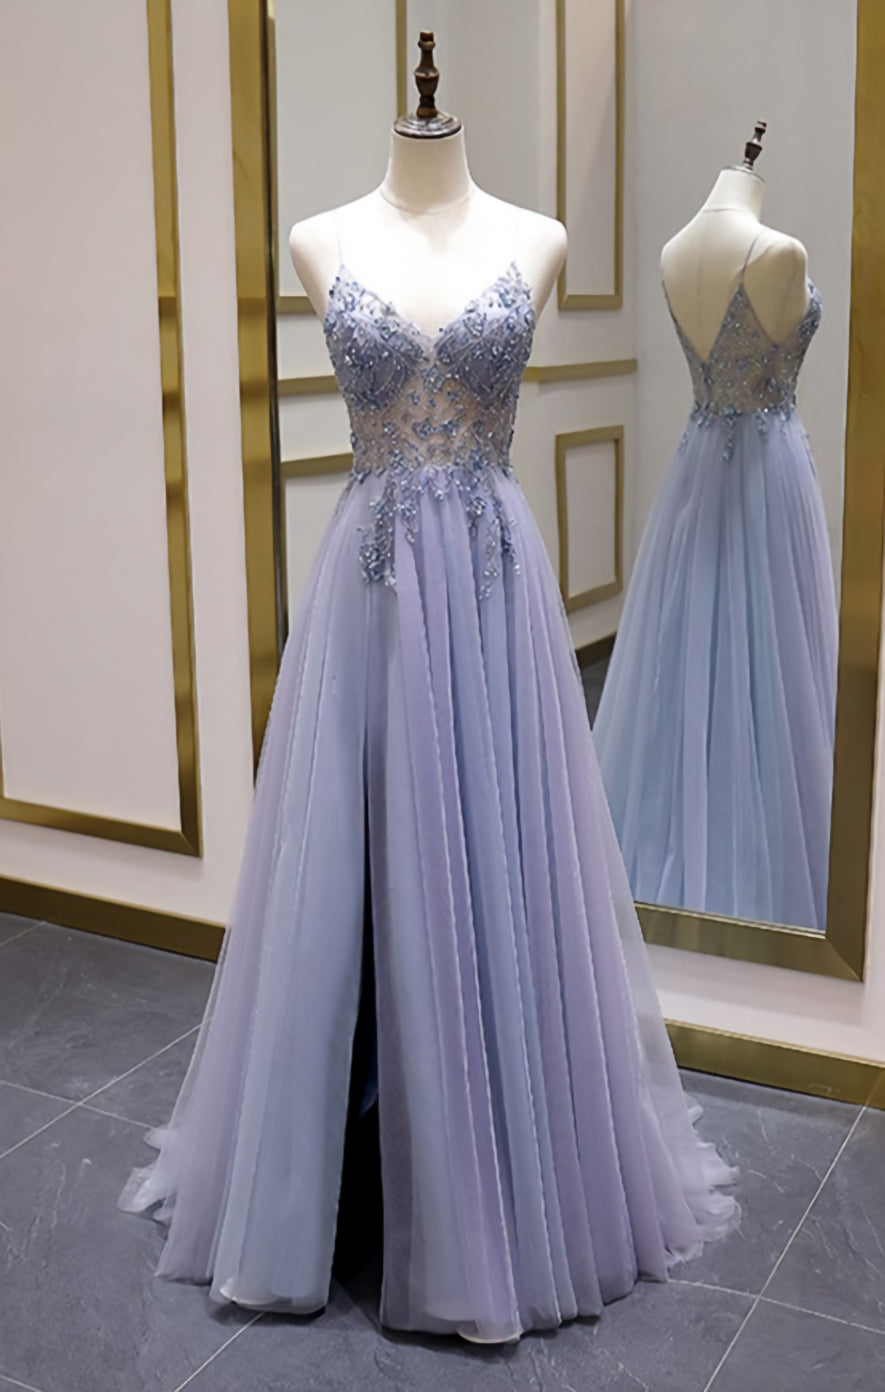 Luxury Beaded A Line Spaghetti Straps Long Corset Prom Dresses,Split Tulle Evening Party Dress Outfits, Wedding Color Schemes